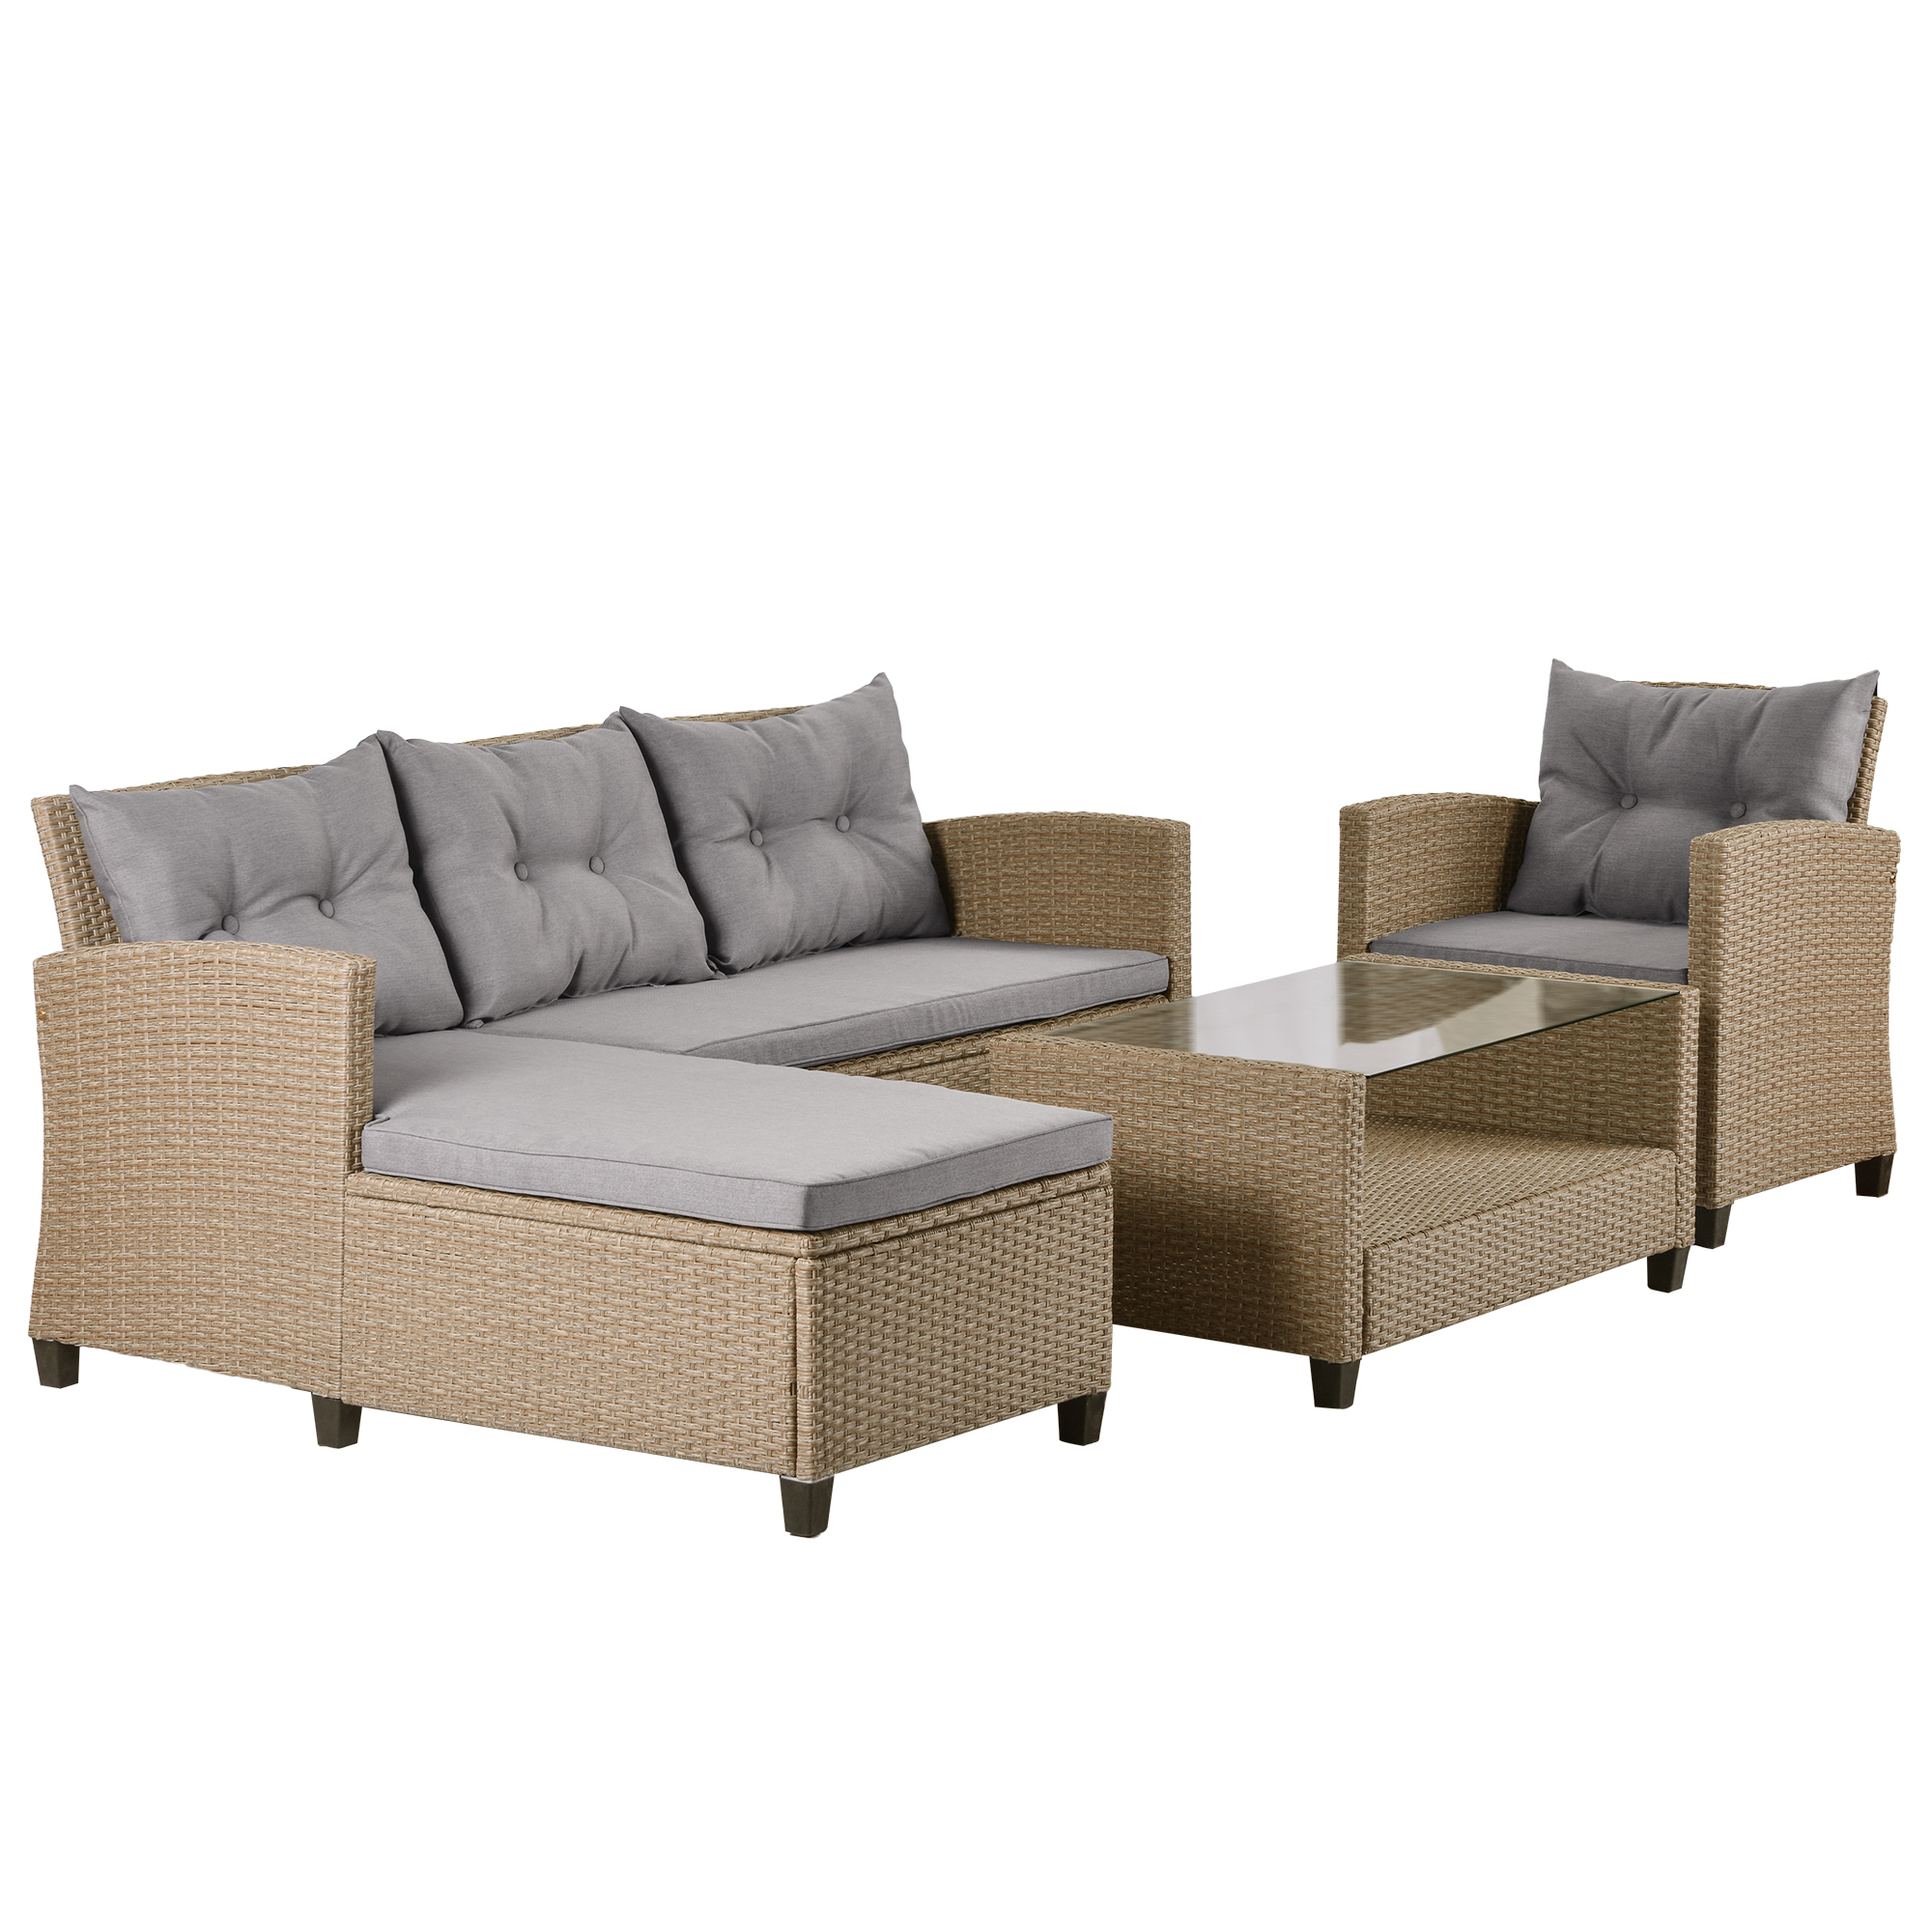 Outdoor Garden Patio Sectional Sofa Sets, SEGMART 4 Pieces Modern Wicker Furniture Set with Storage Tempered Glass Coffee Table, Armchair, Conversation Sets for Porch Poolside Backyard, S1497 - image 4 of 9